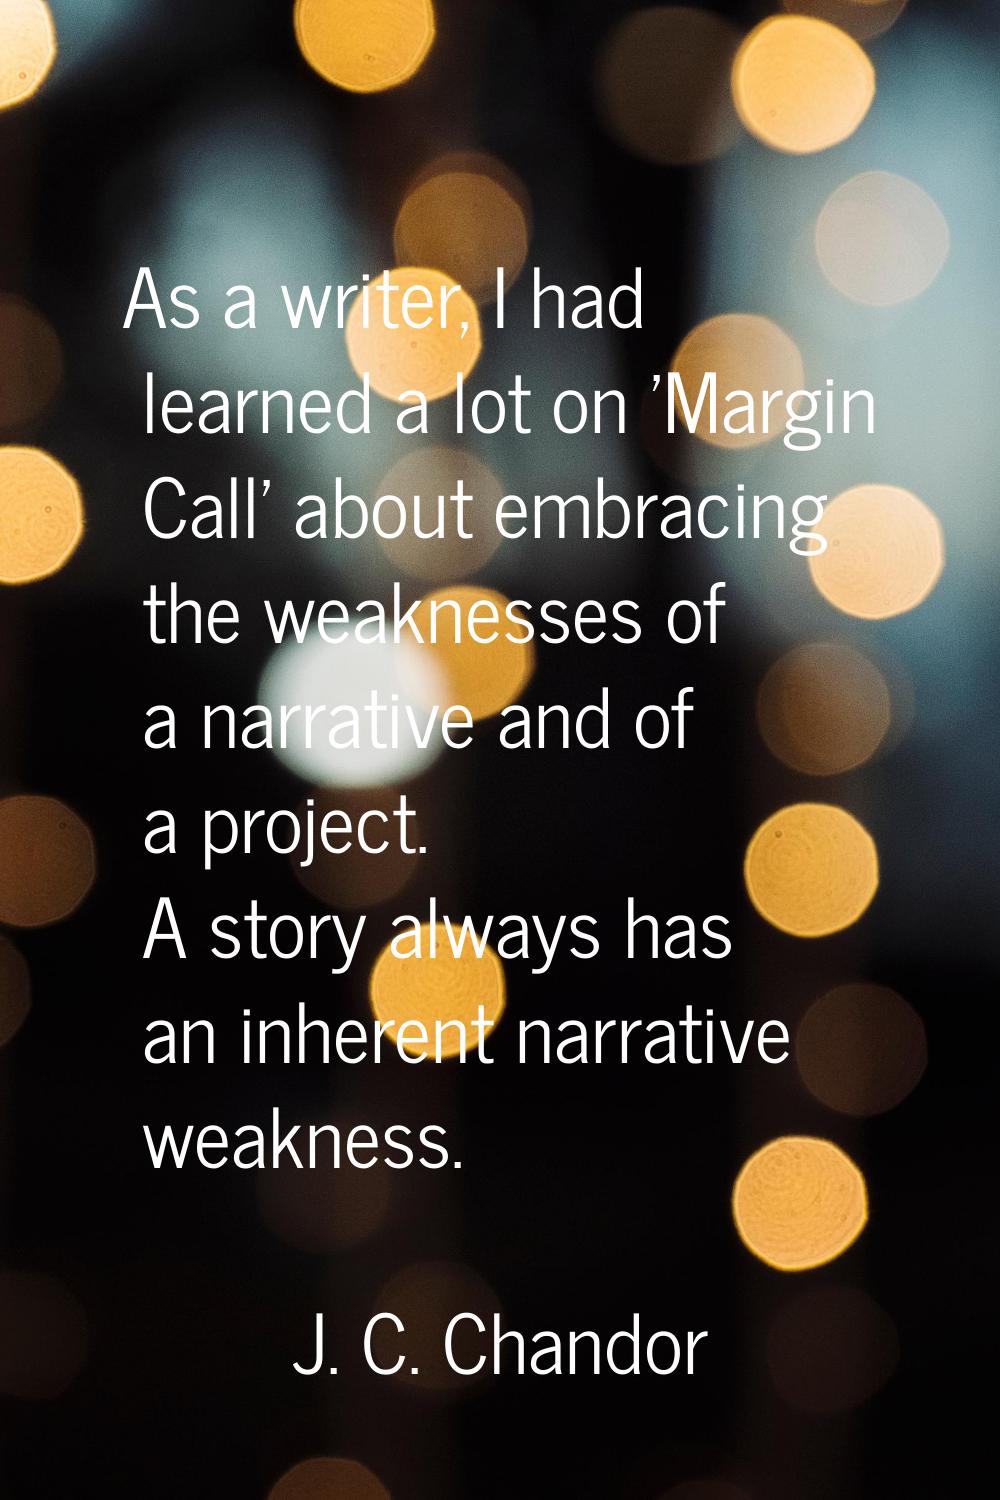 As a writer, I had learned a lot on 'Margin Call' about embracing the weaknesses of a narrative and